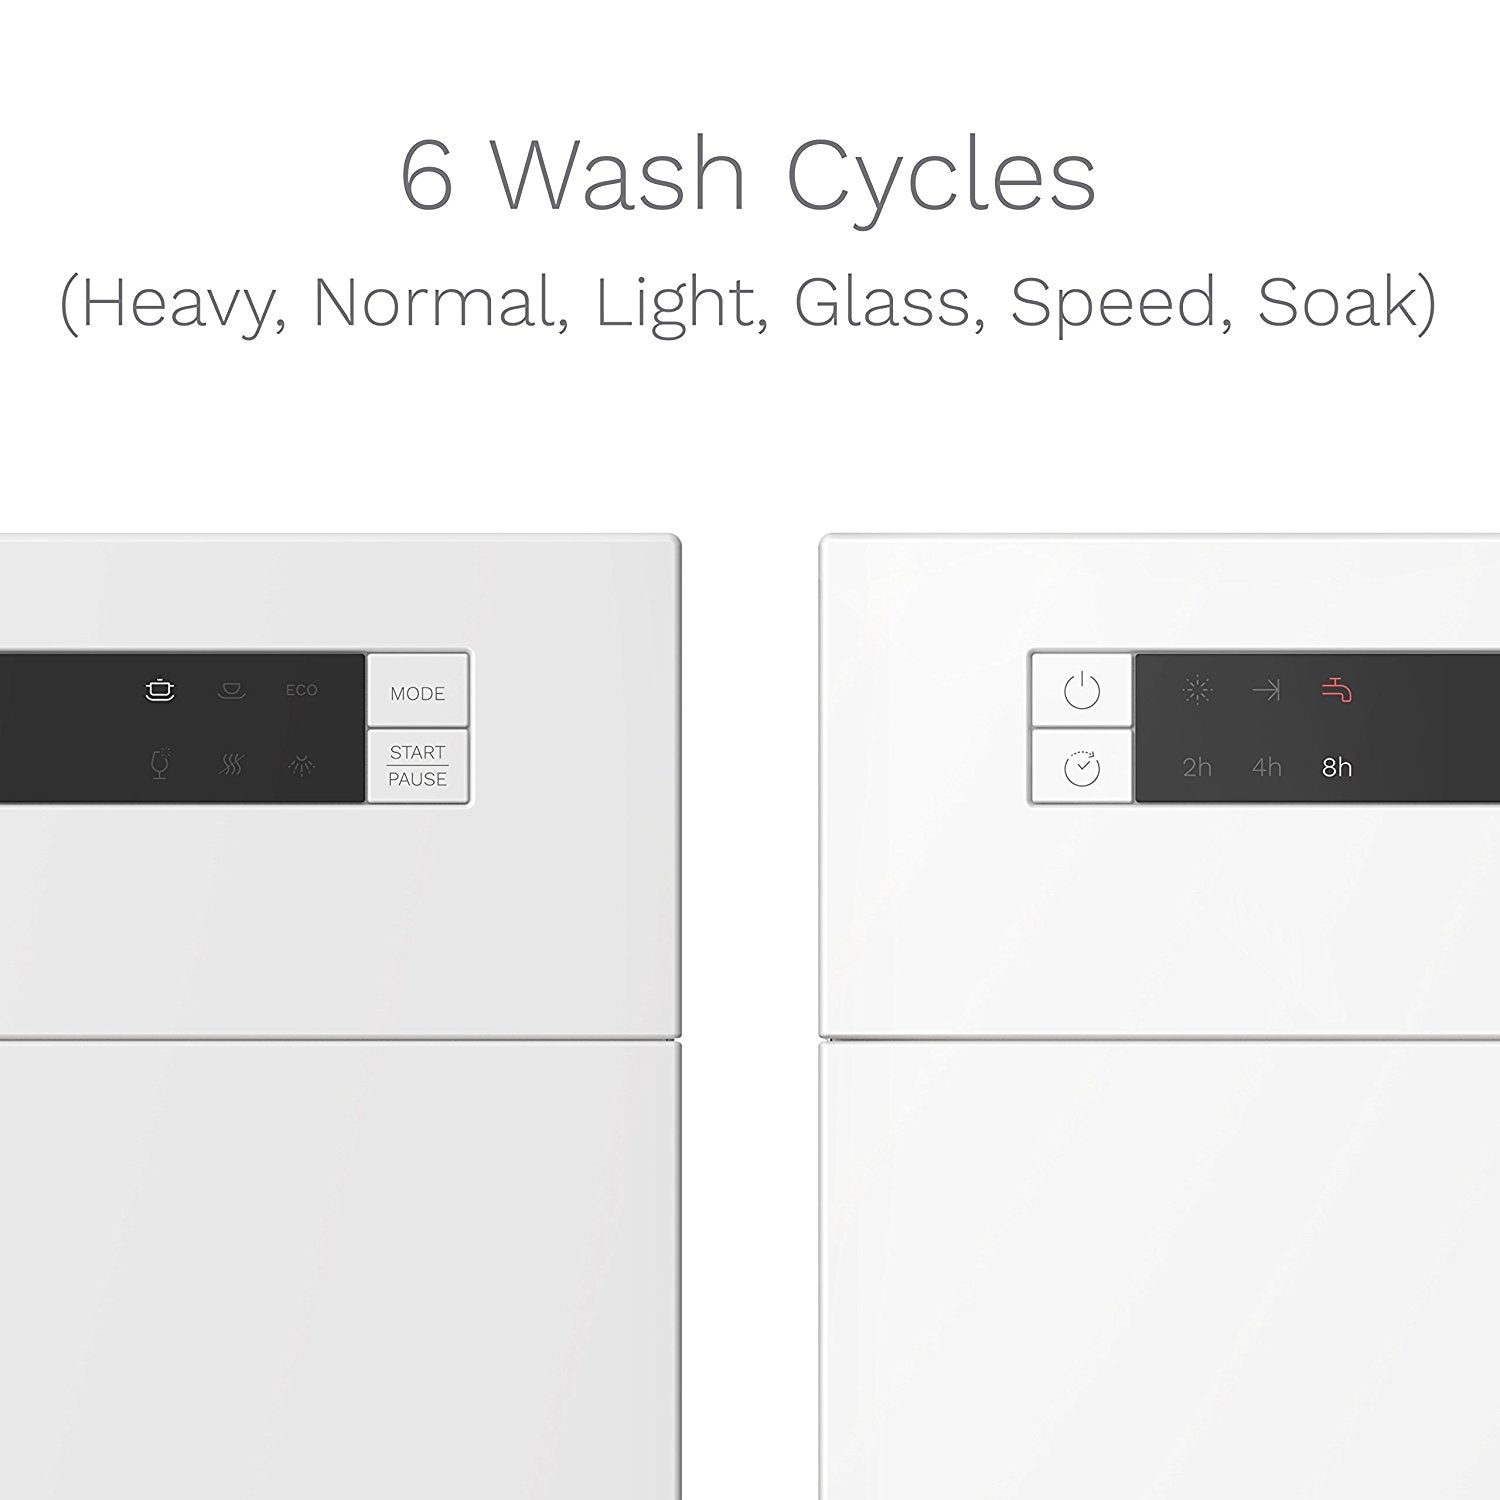 With 6 wash cycles 